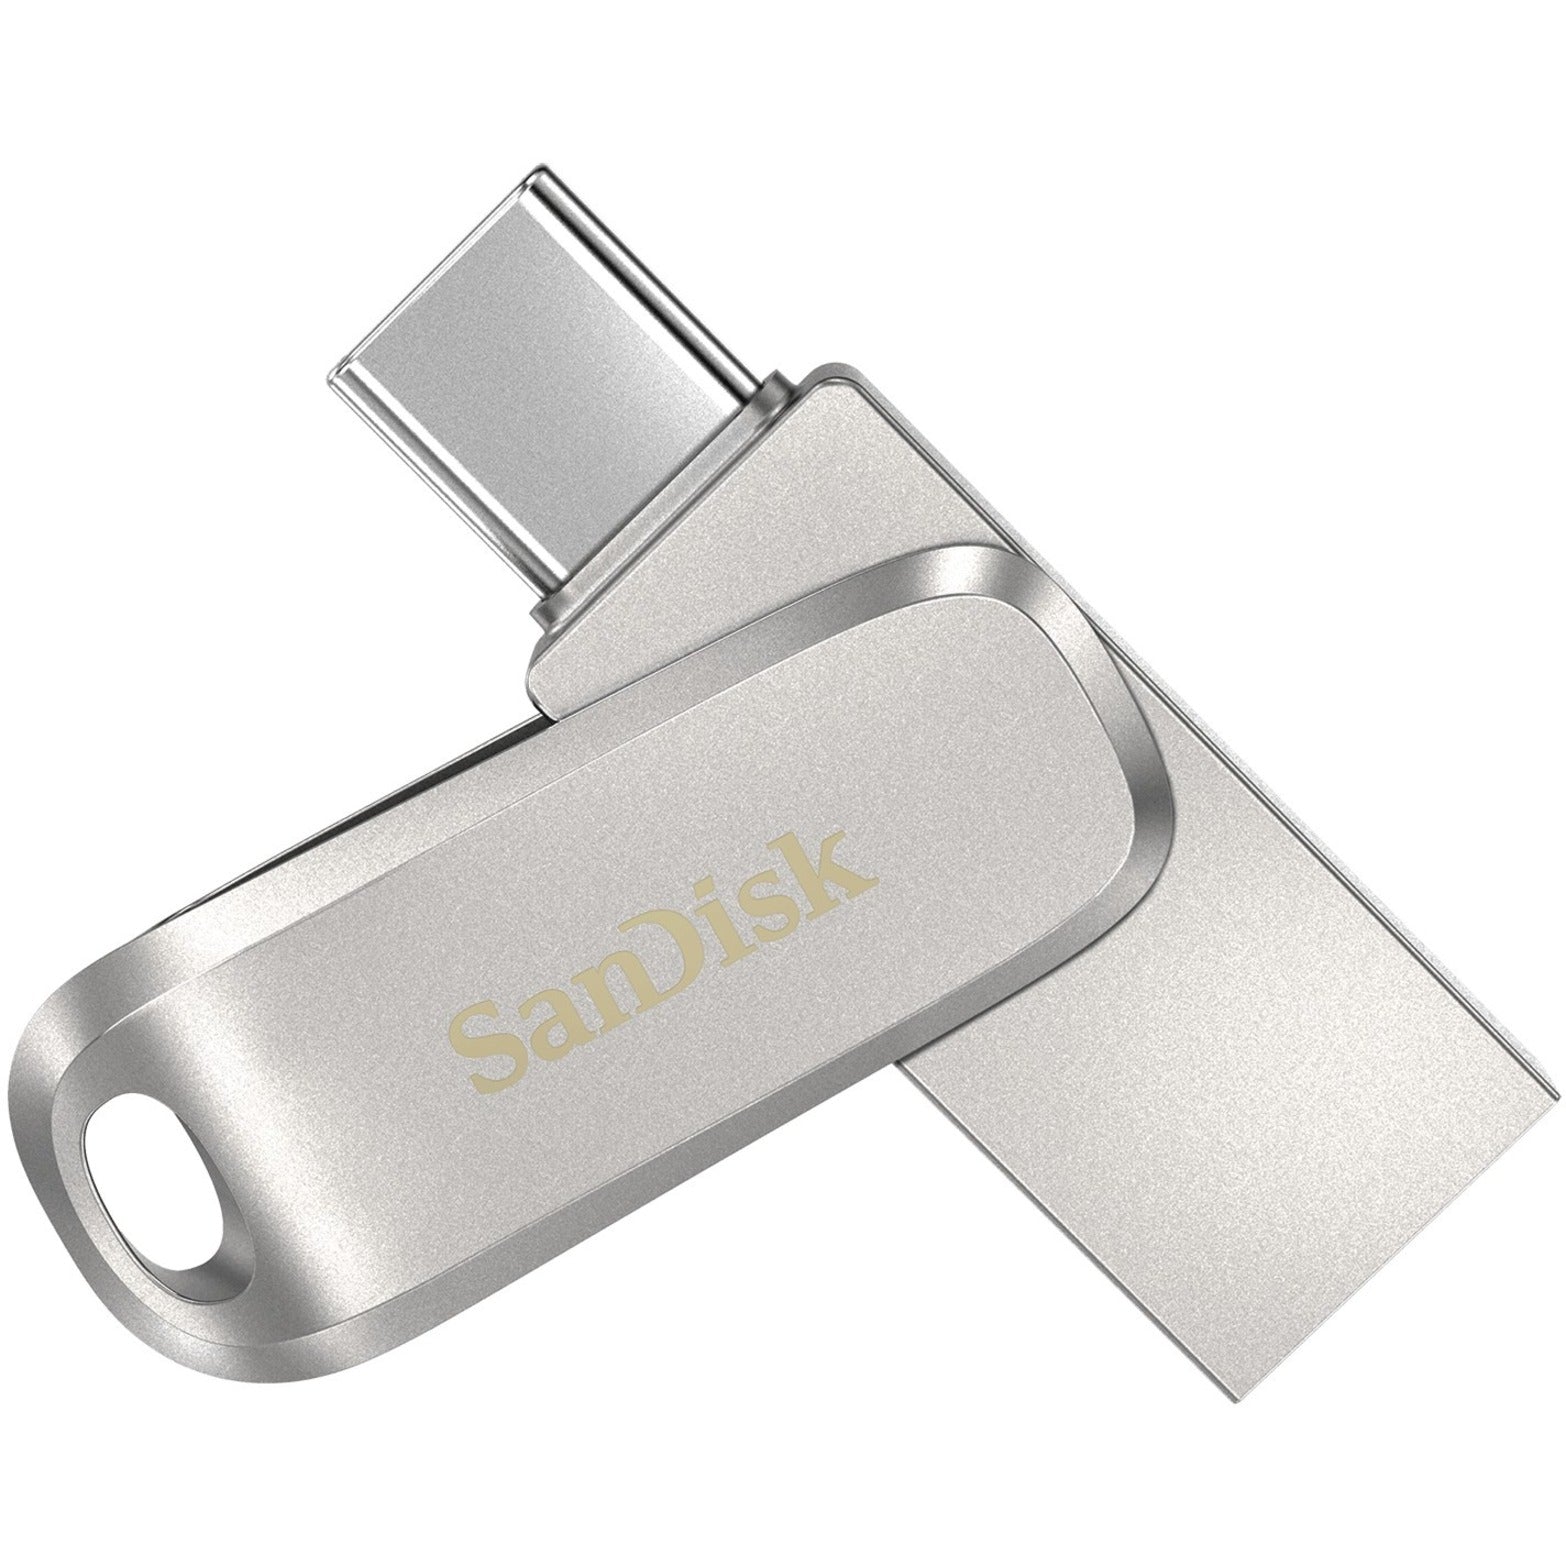 SanDisk SDDDC4-128G-A46 Ultra Dual Drive Luxe USB Type-C - 128GB High-Speed Data Transfer and Storage